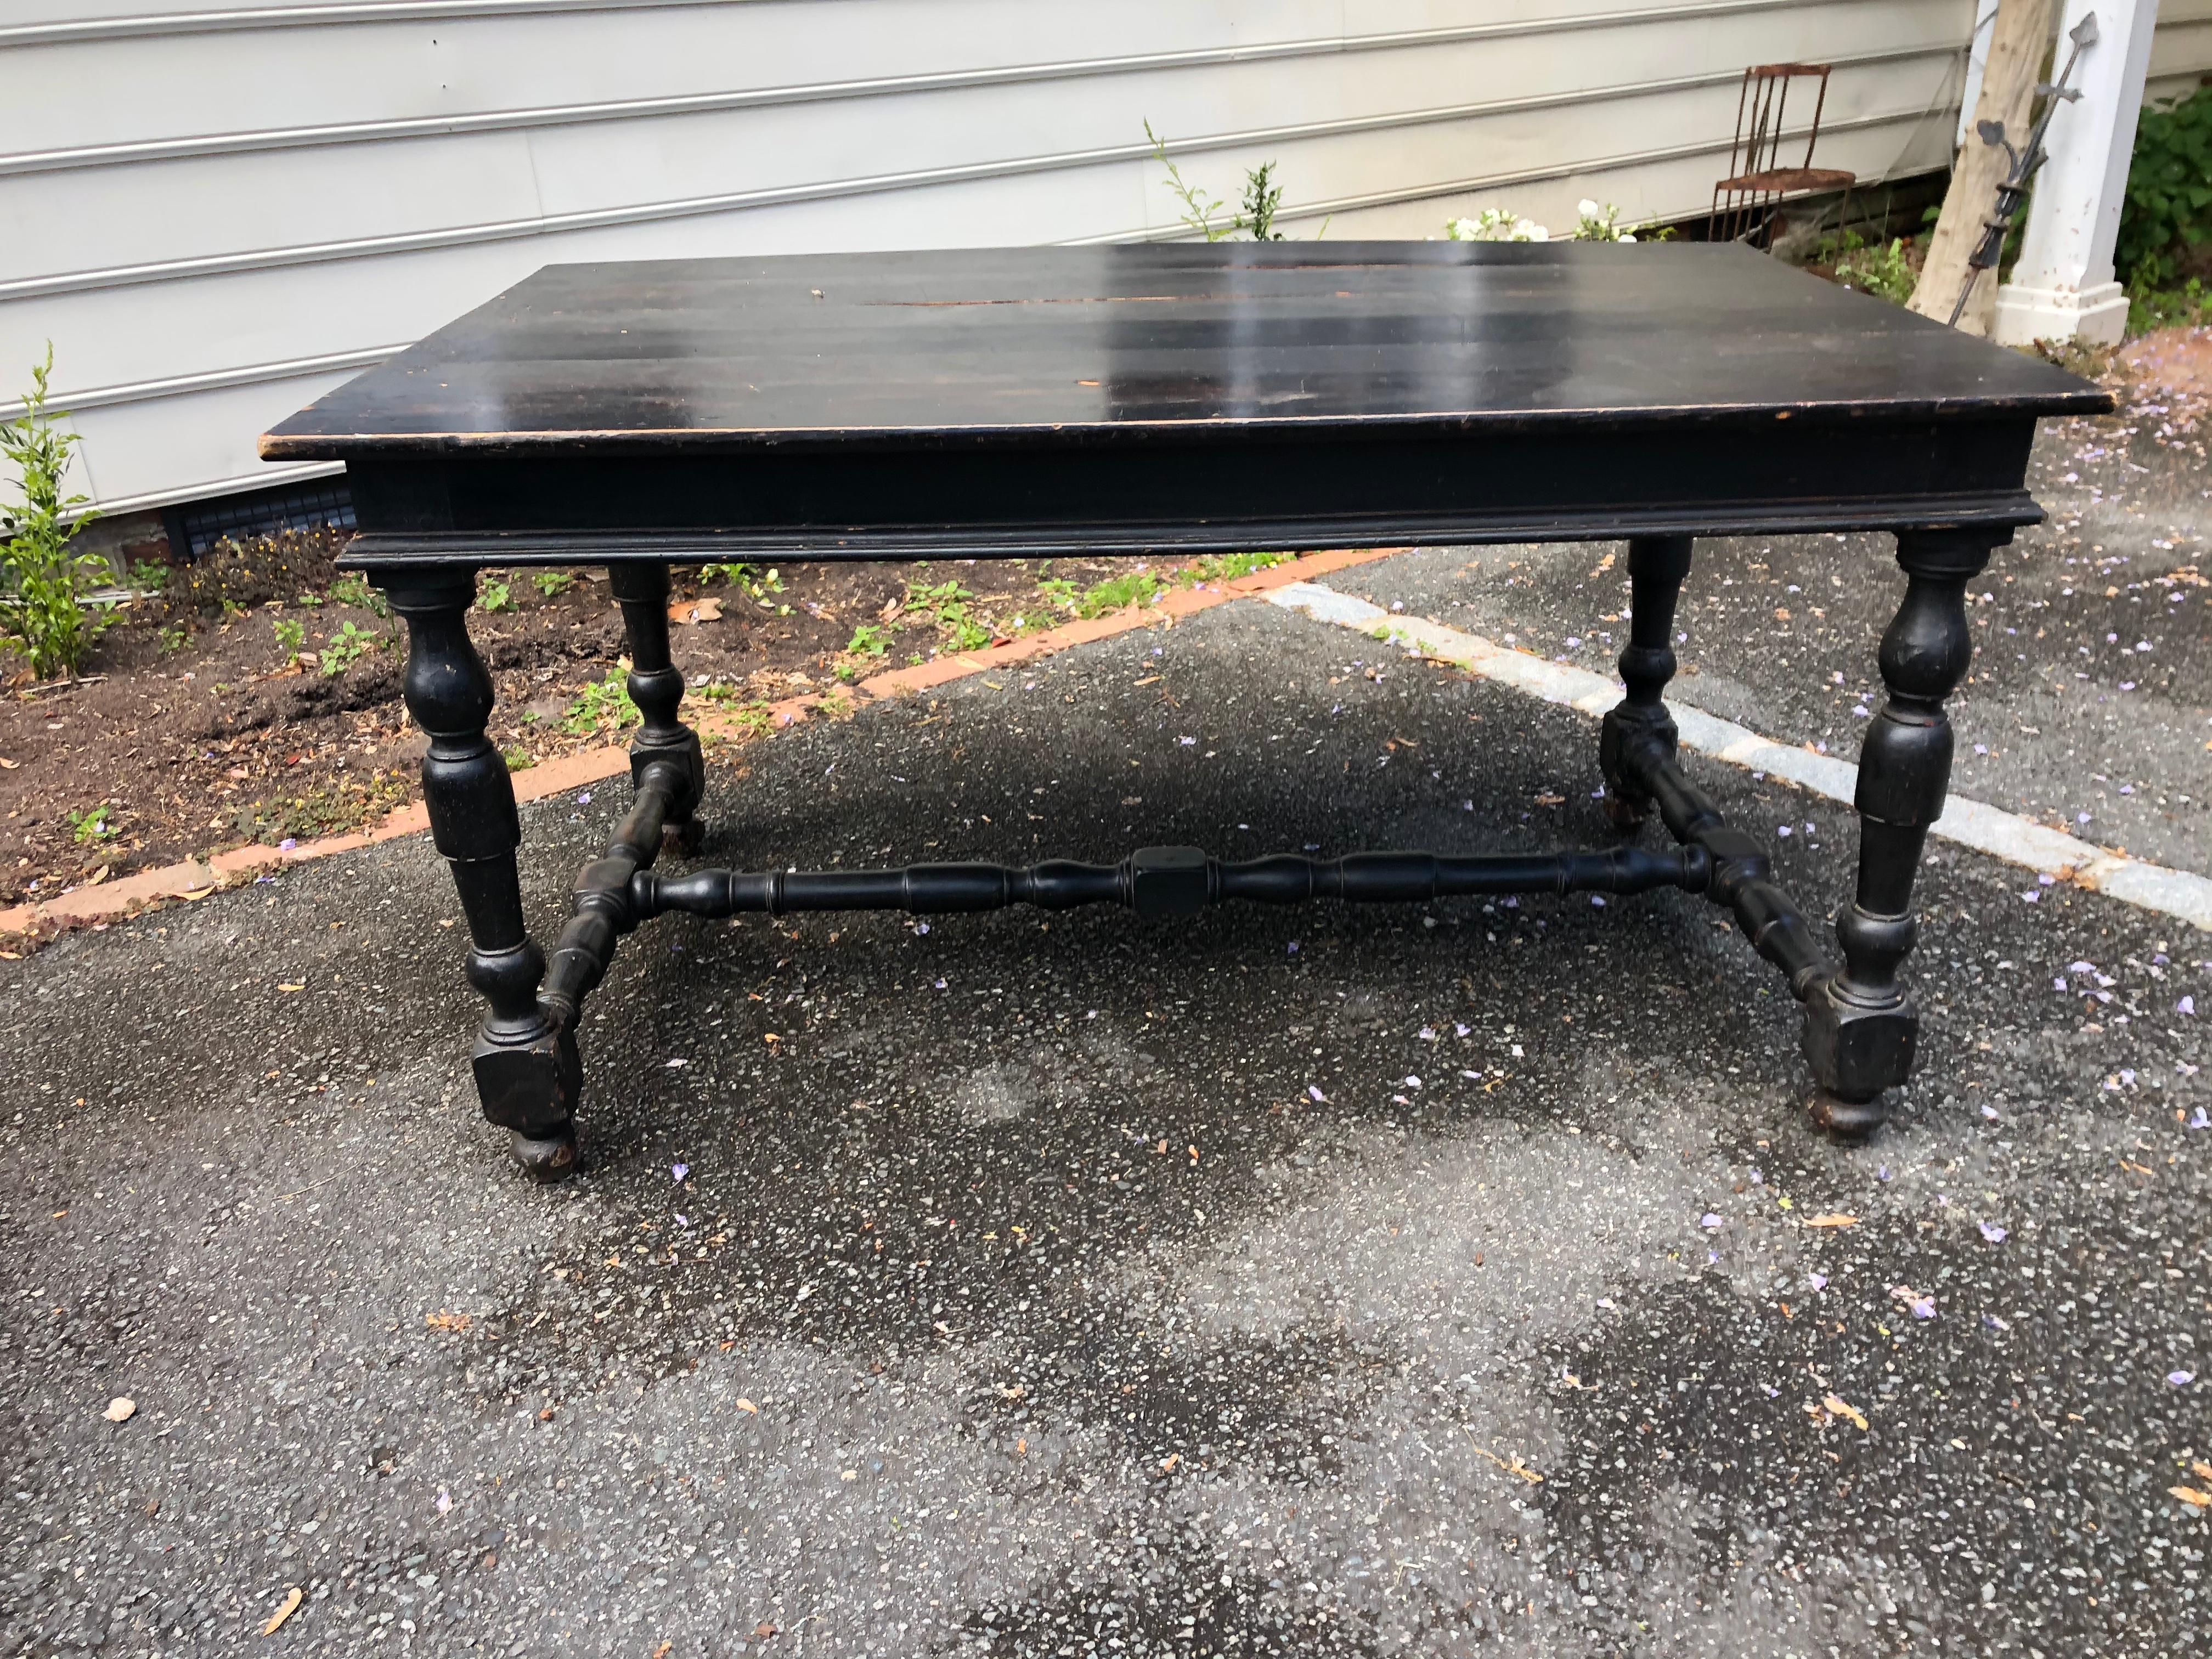 19th century Italian black painted table with turned legs and stretcher.